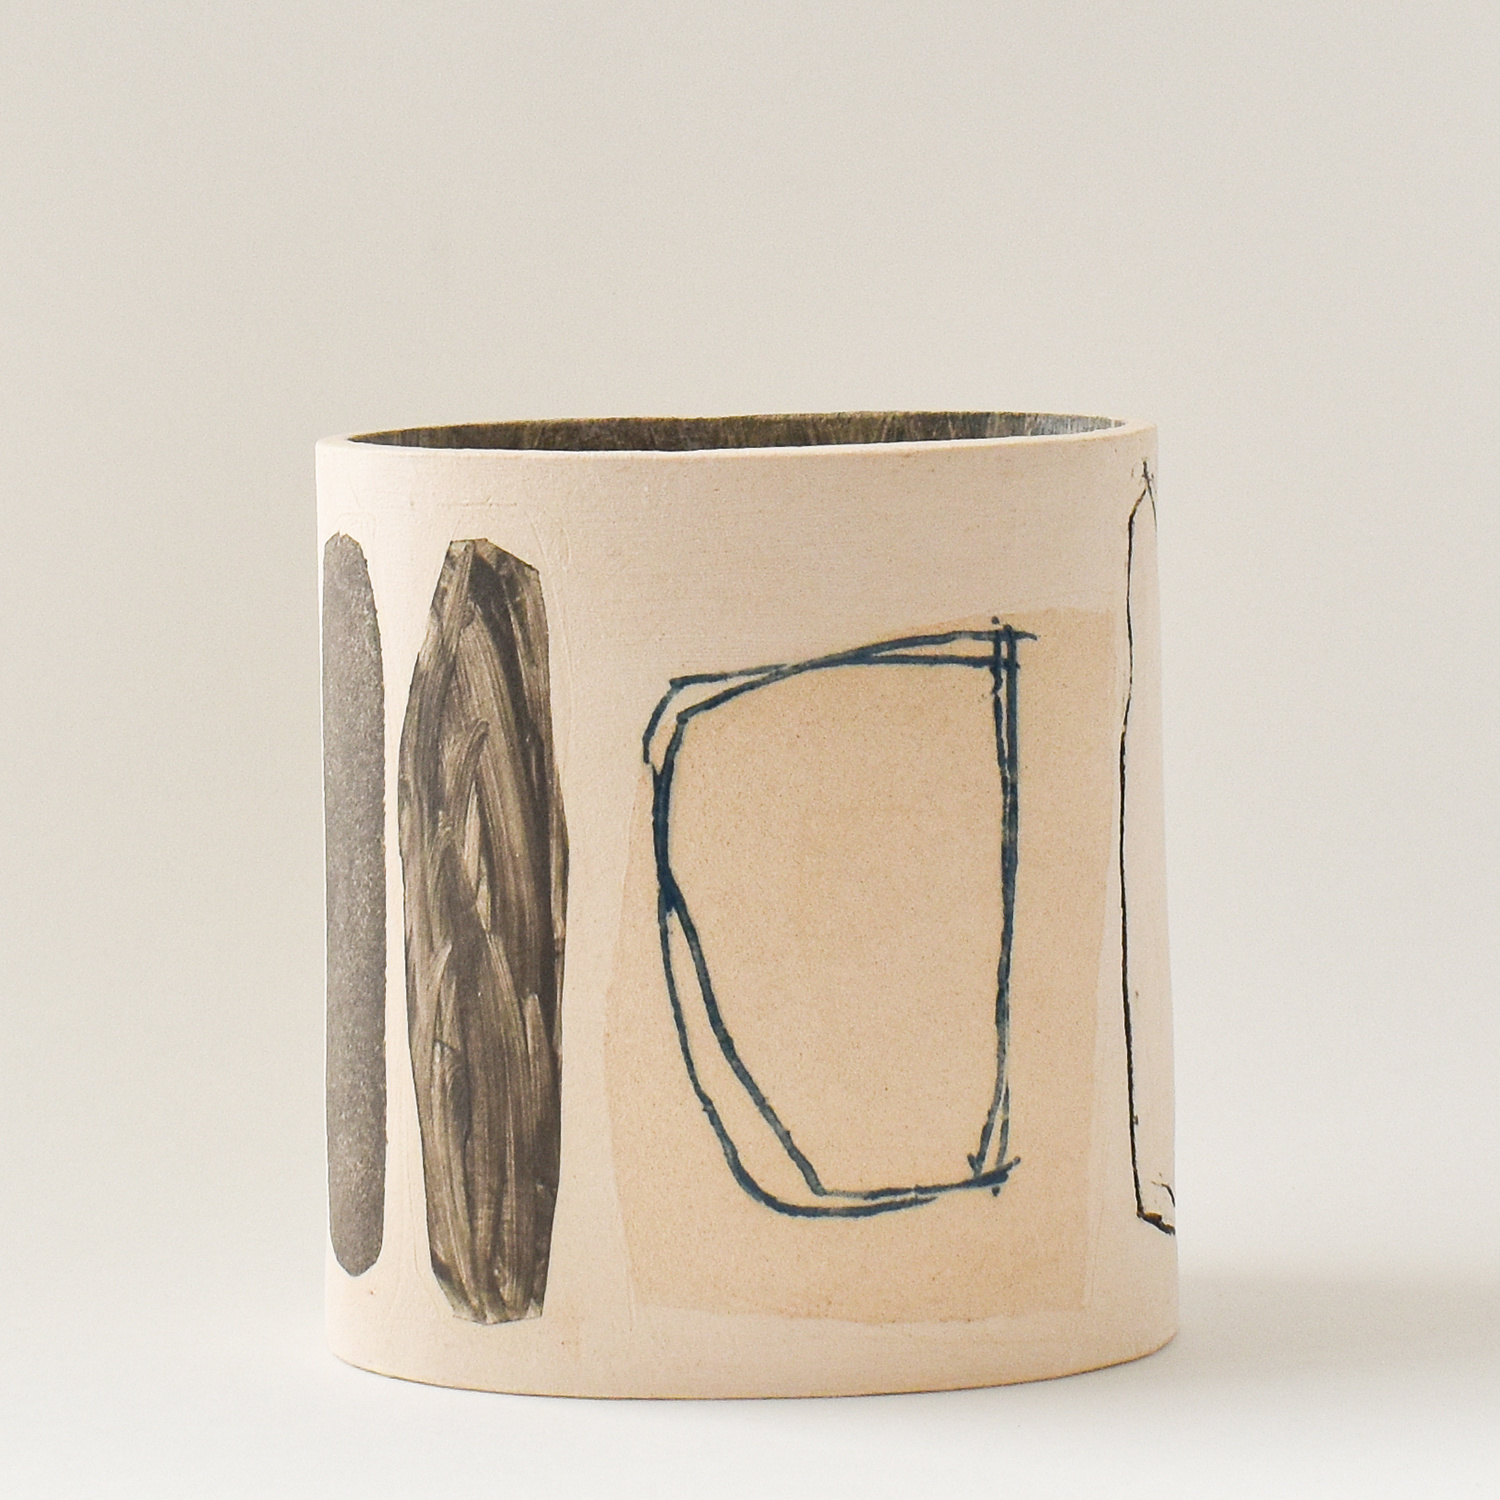 Narrow Oval Vessel, medium by Louise McNiff